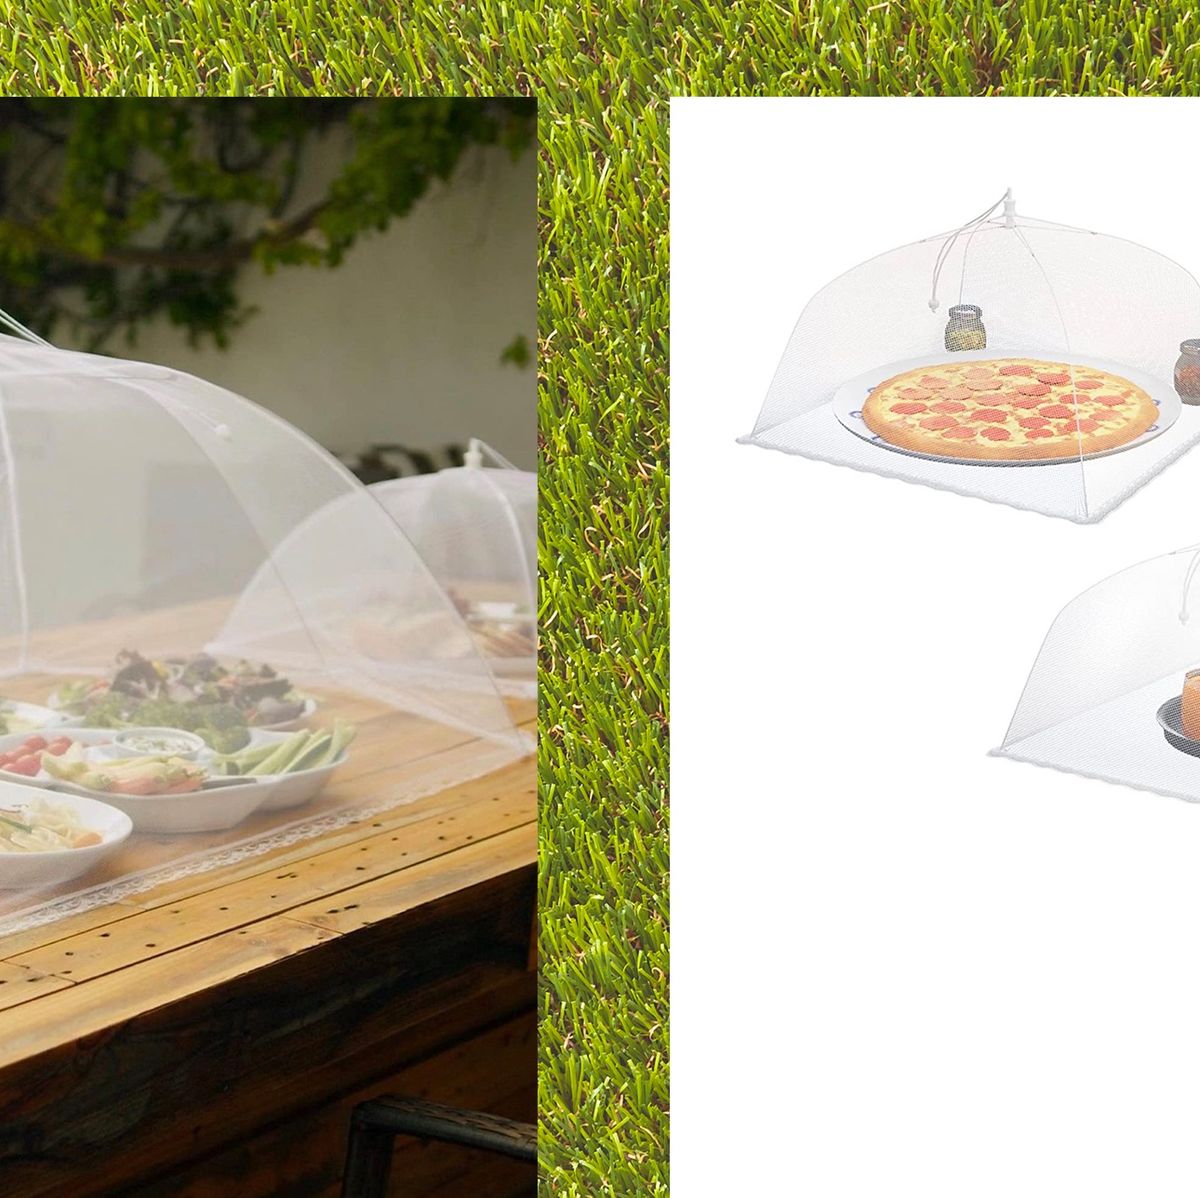 60CM food net cover dish cover for food Leftovers Food table food cover  food cover Mesh